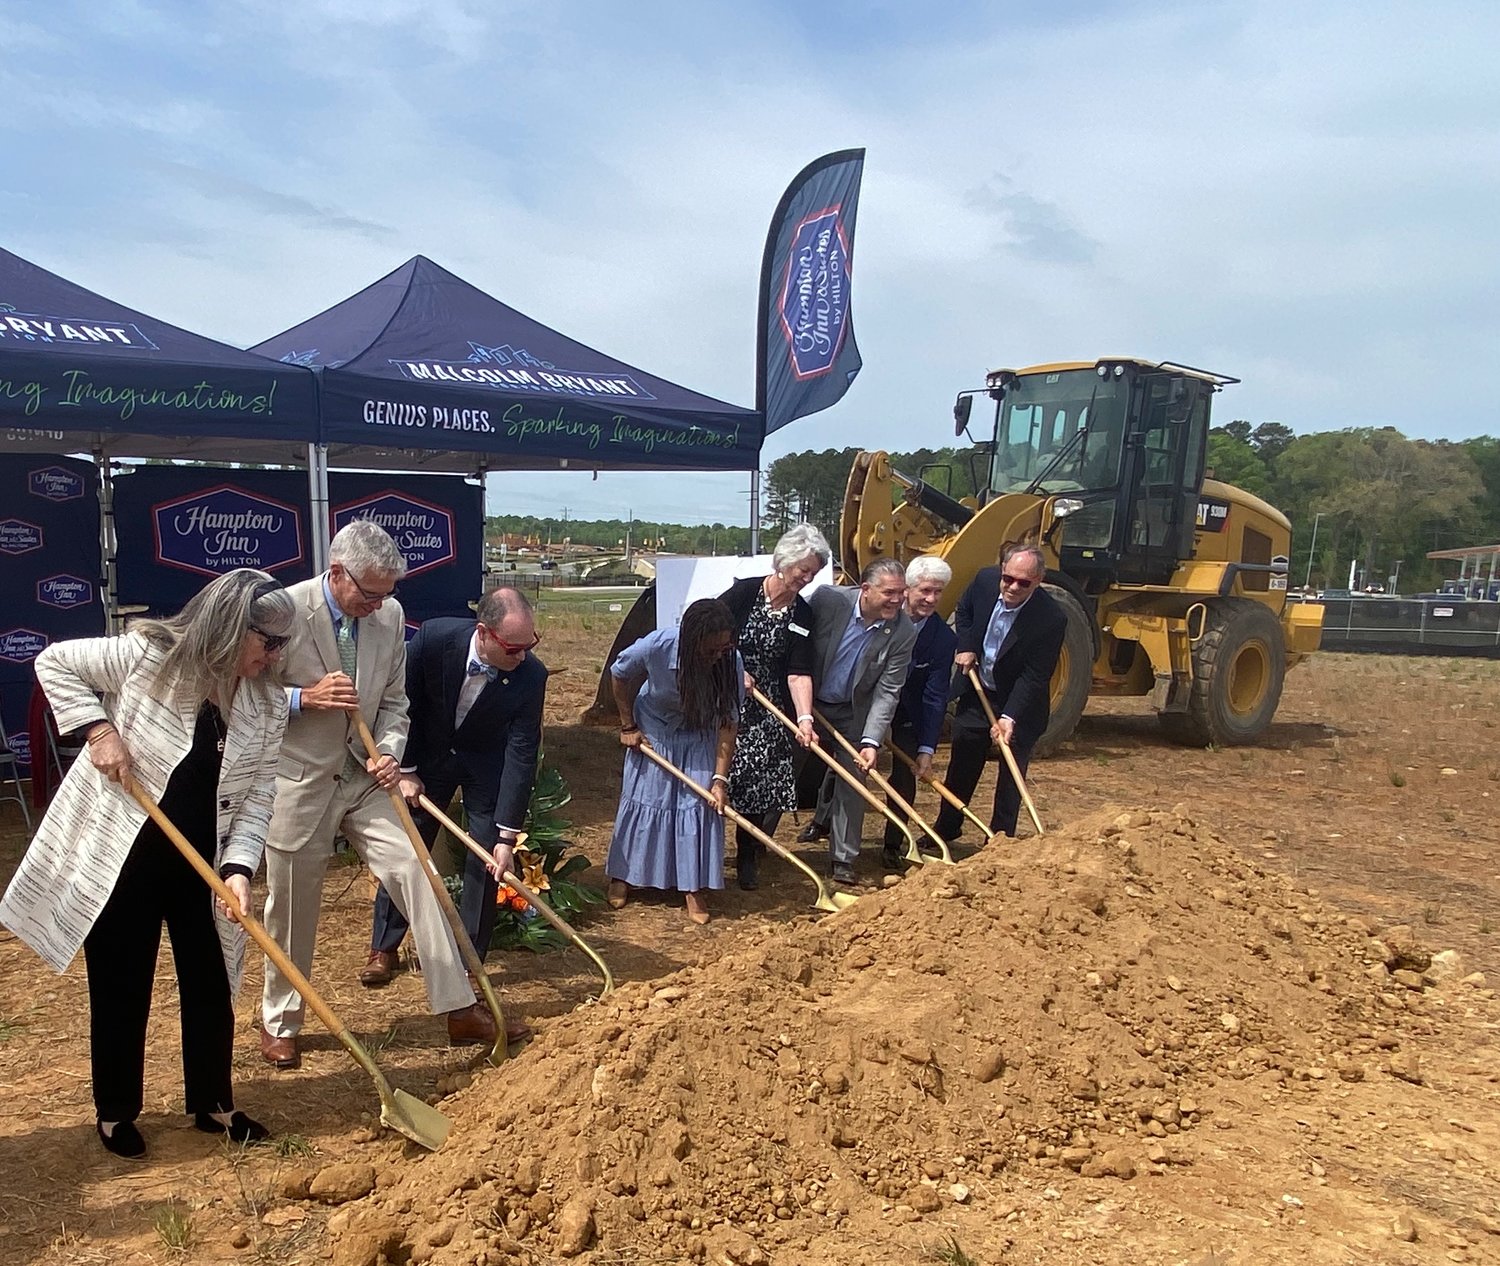 Project developers and local officials 'turn the dirt' at Thursday's groundbreaking ceremony.